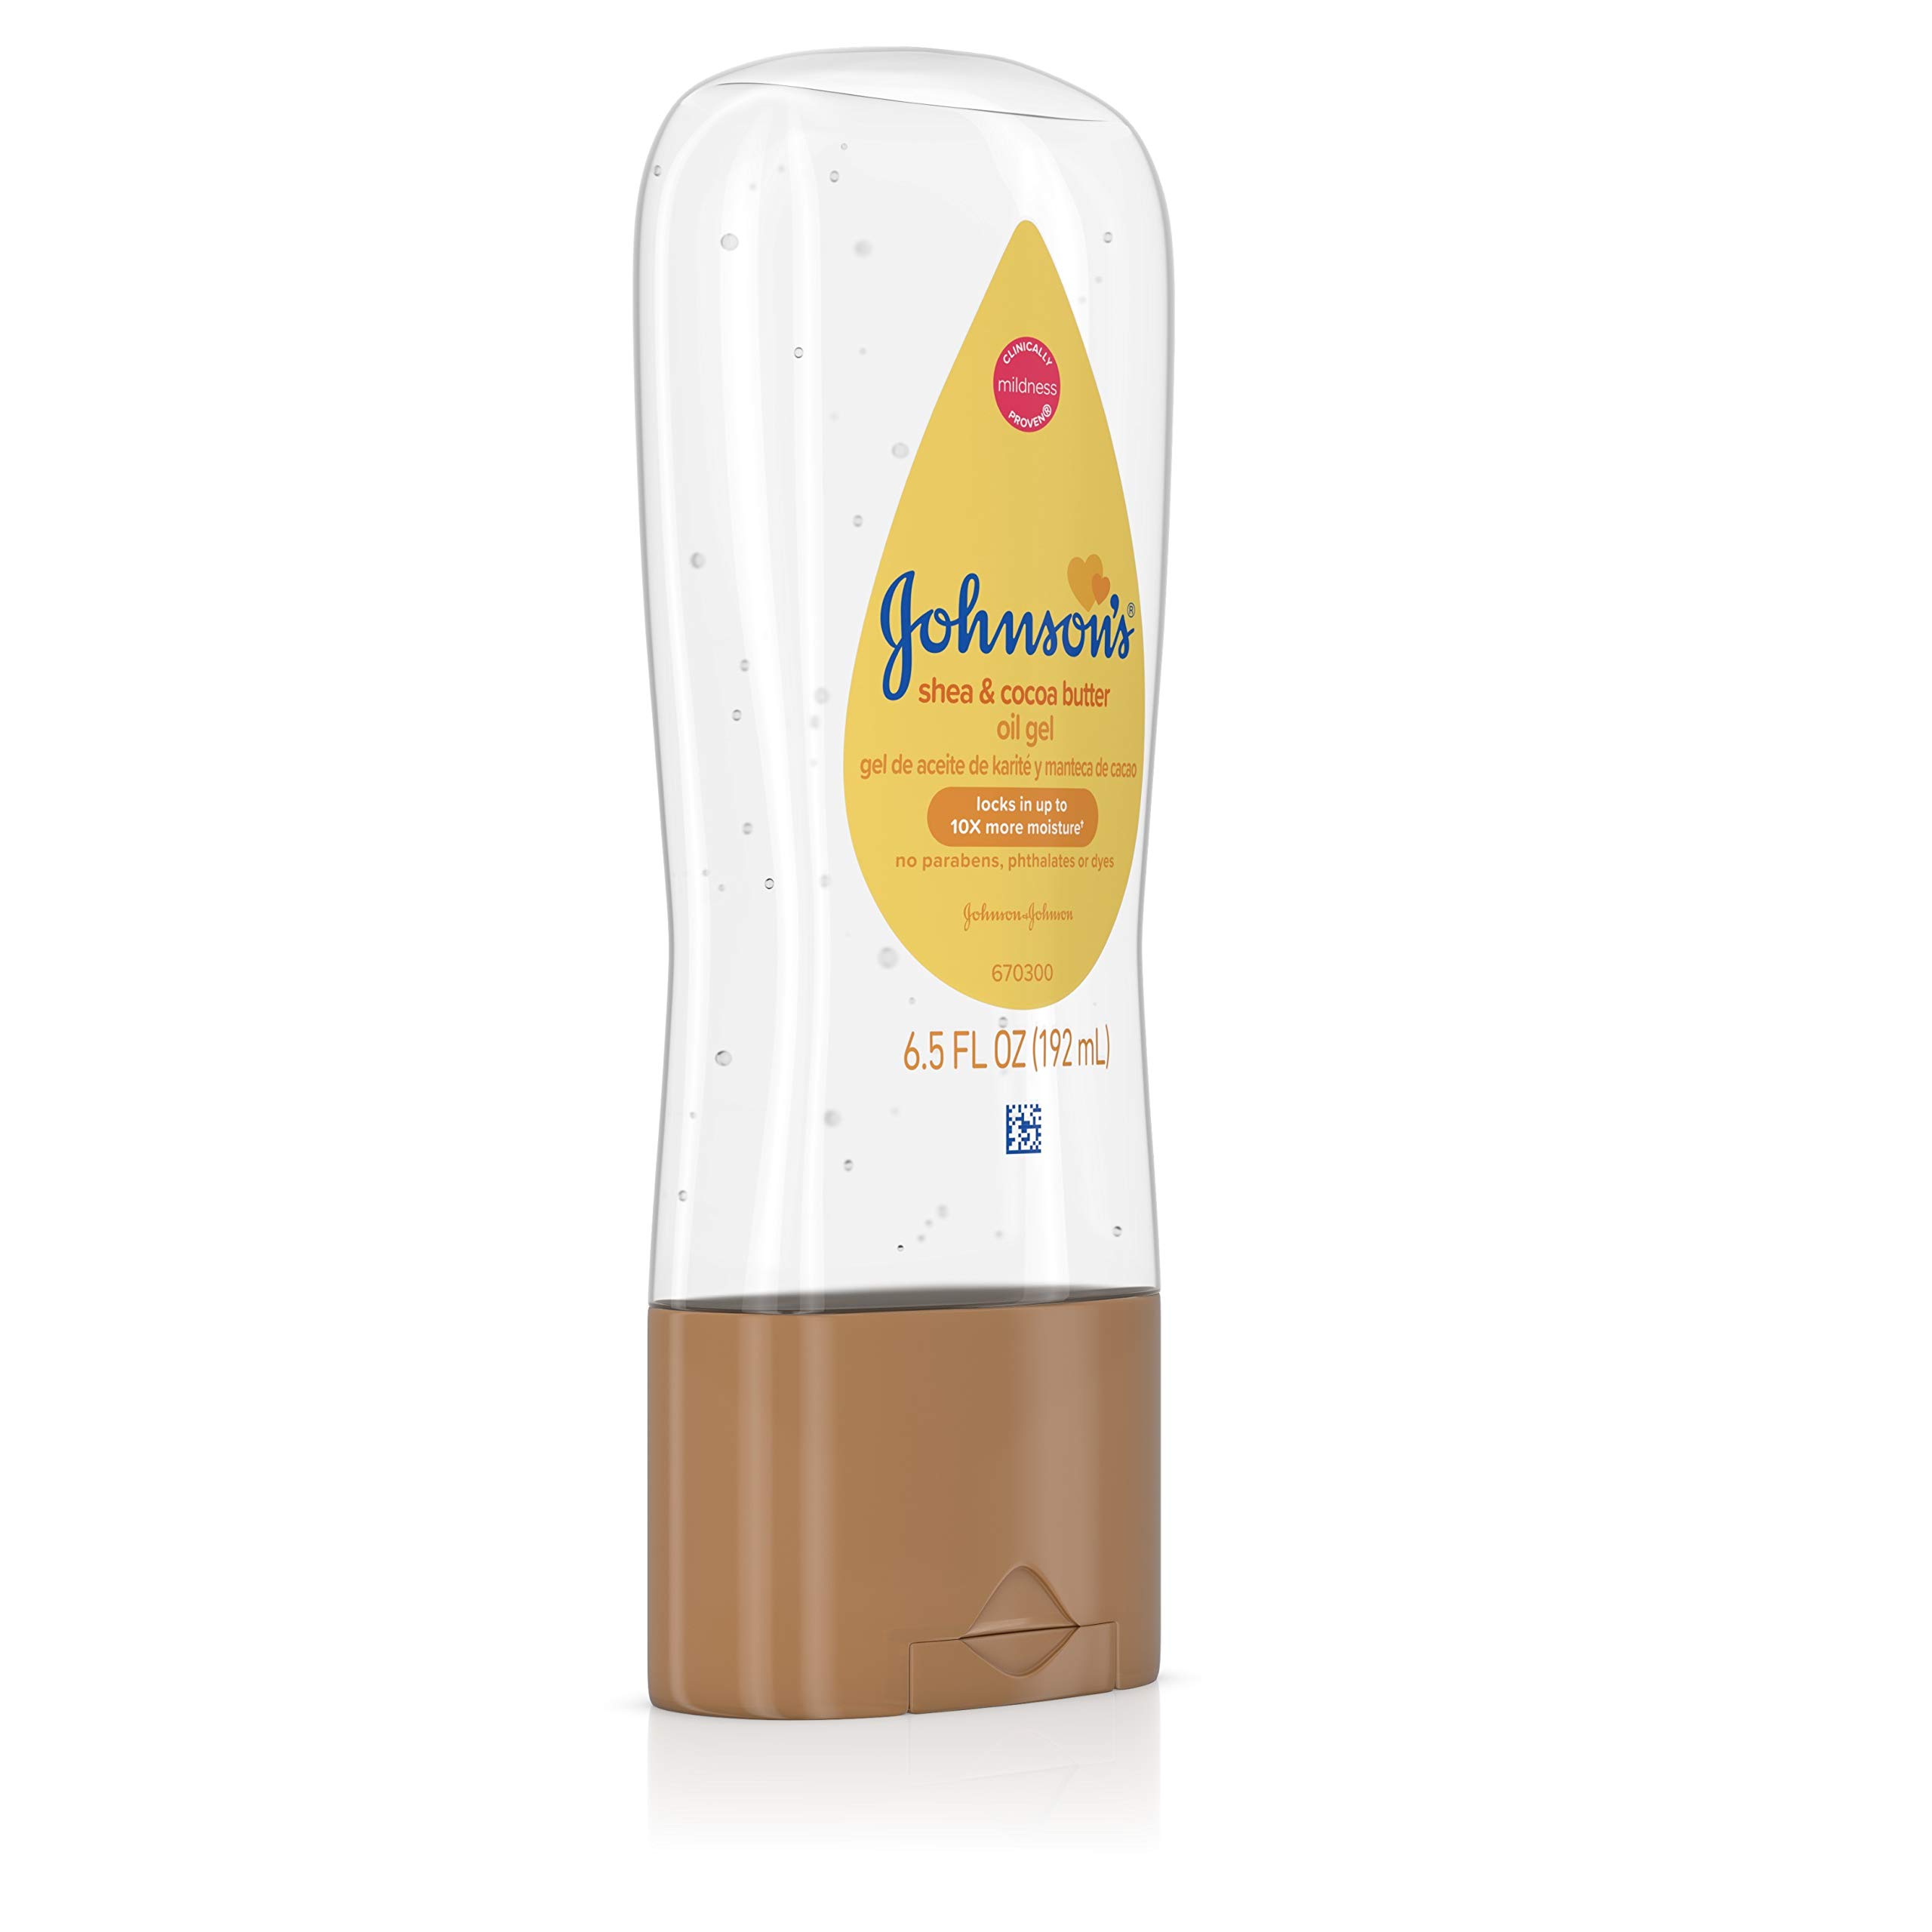 Johnson's Baby Oil Gel, Moisturizing Baby Massage Mineral Oil Enriched with Shea & Cocoa Butter, Dry Skin Relief for Babies, Kids & Adults, Nourishing & Gentle on Delicate Skin, 6.5 fl. oz